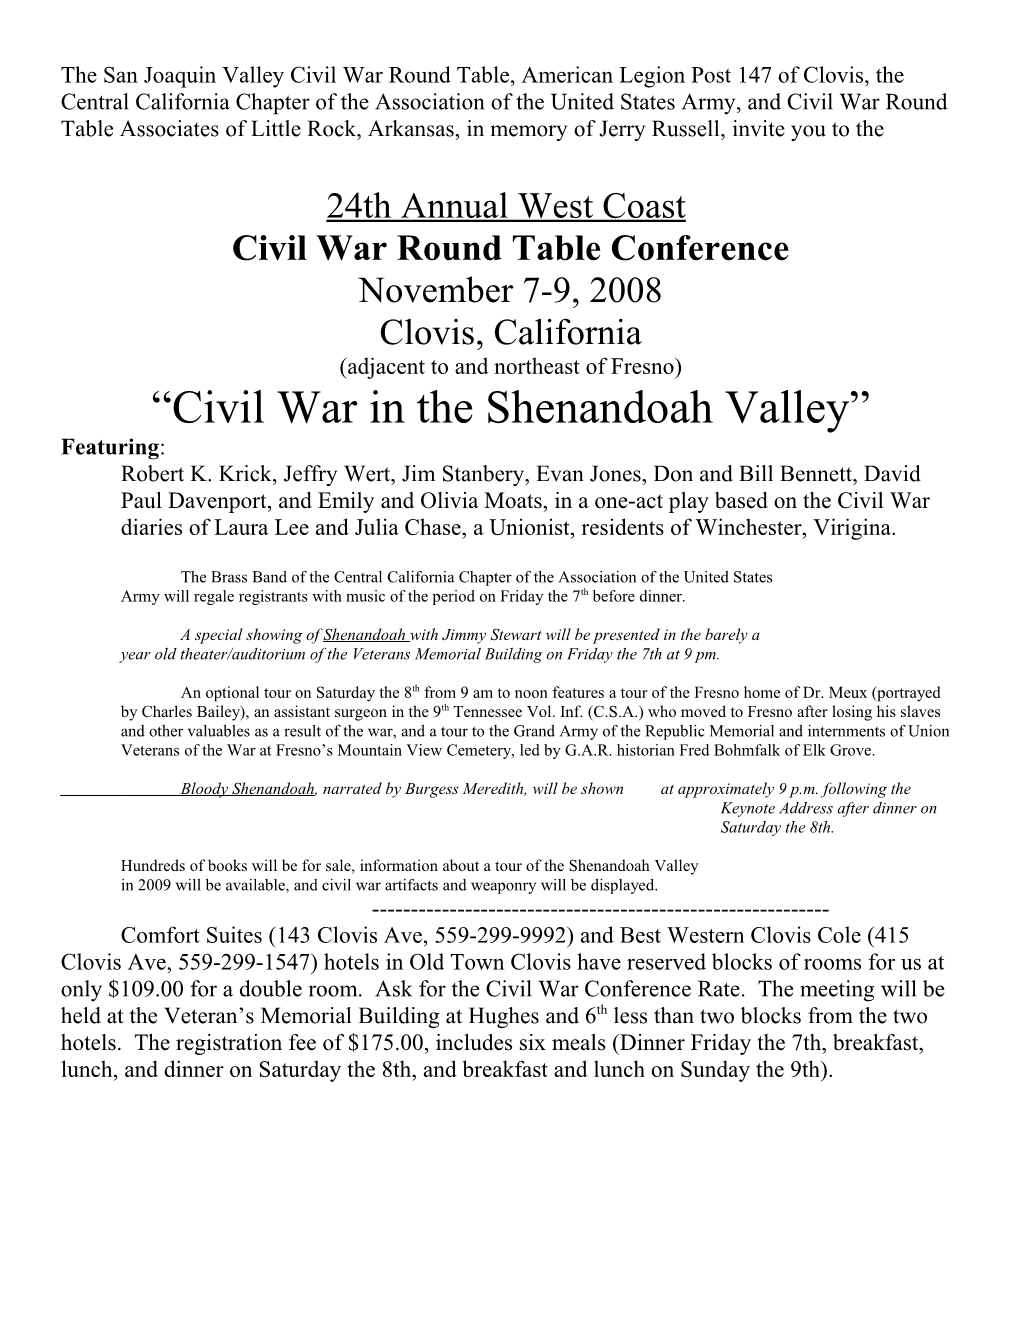 The San Joaquin Valley Civil War Round Table, American Legion Post 147 of Clovis, the Central